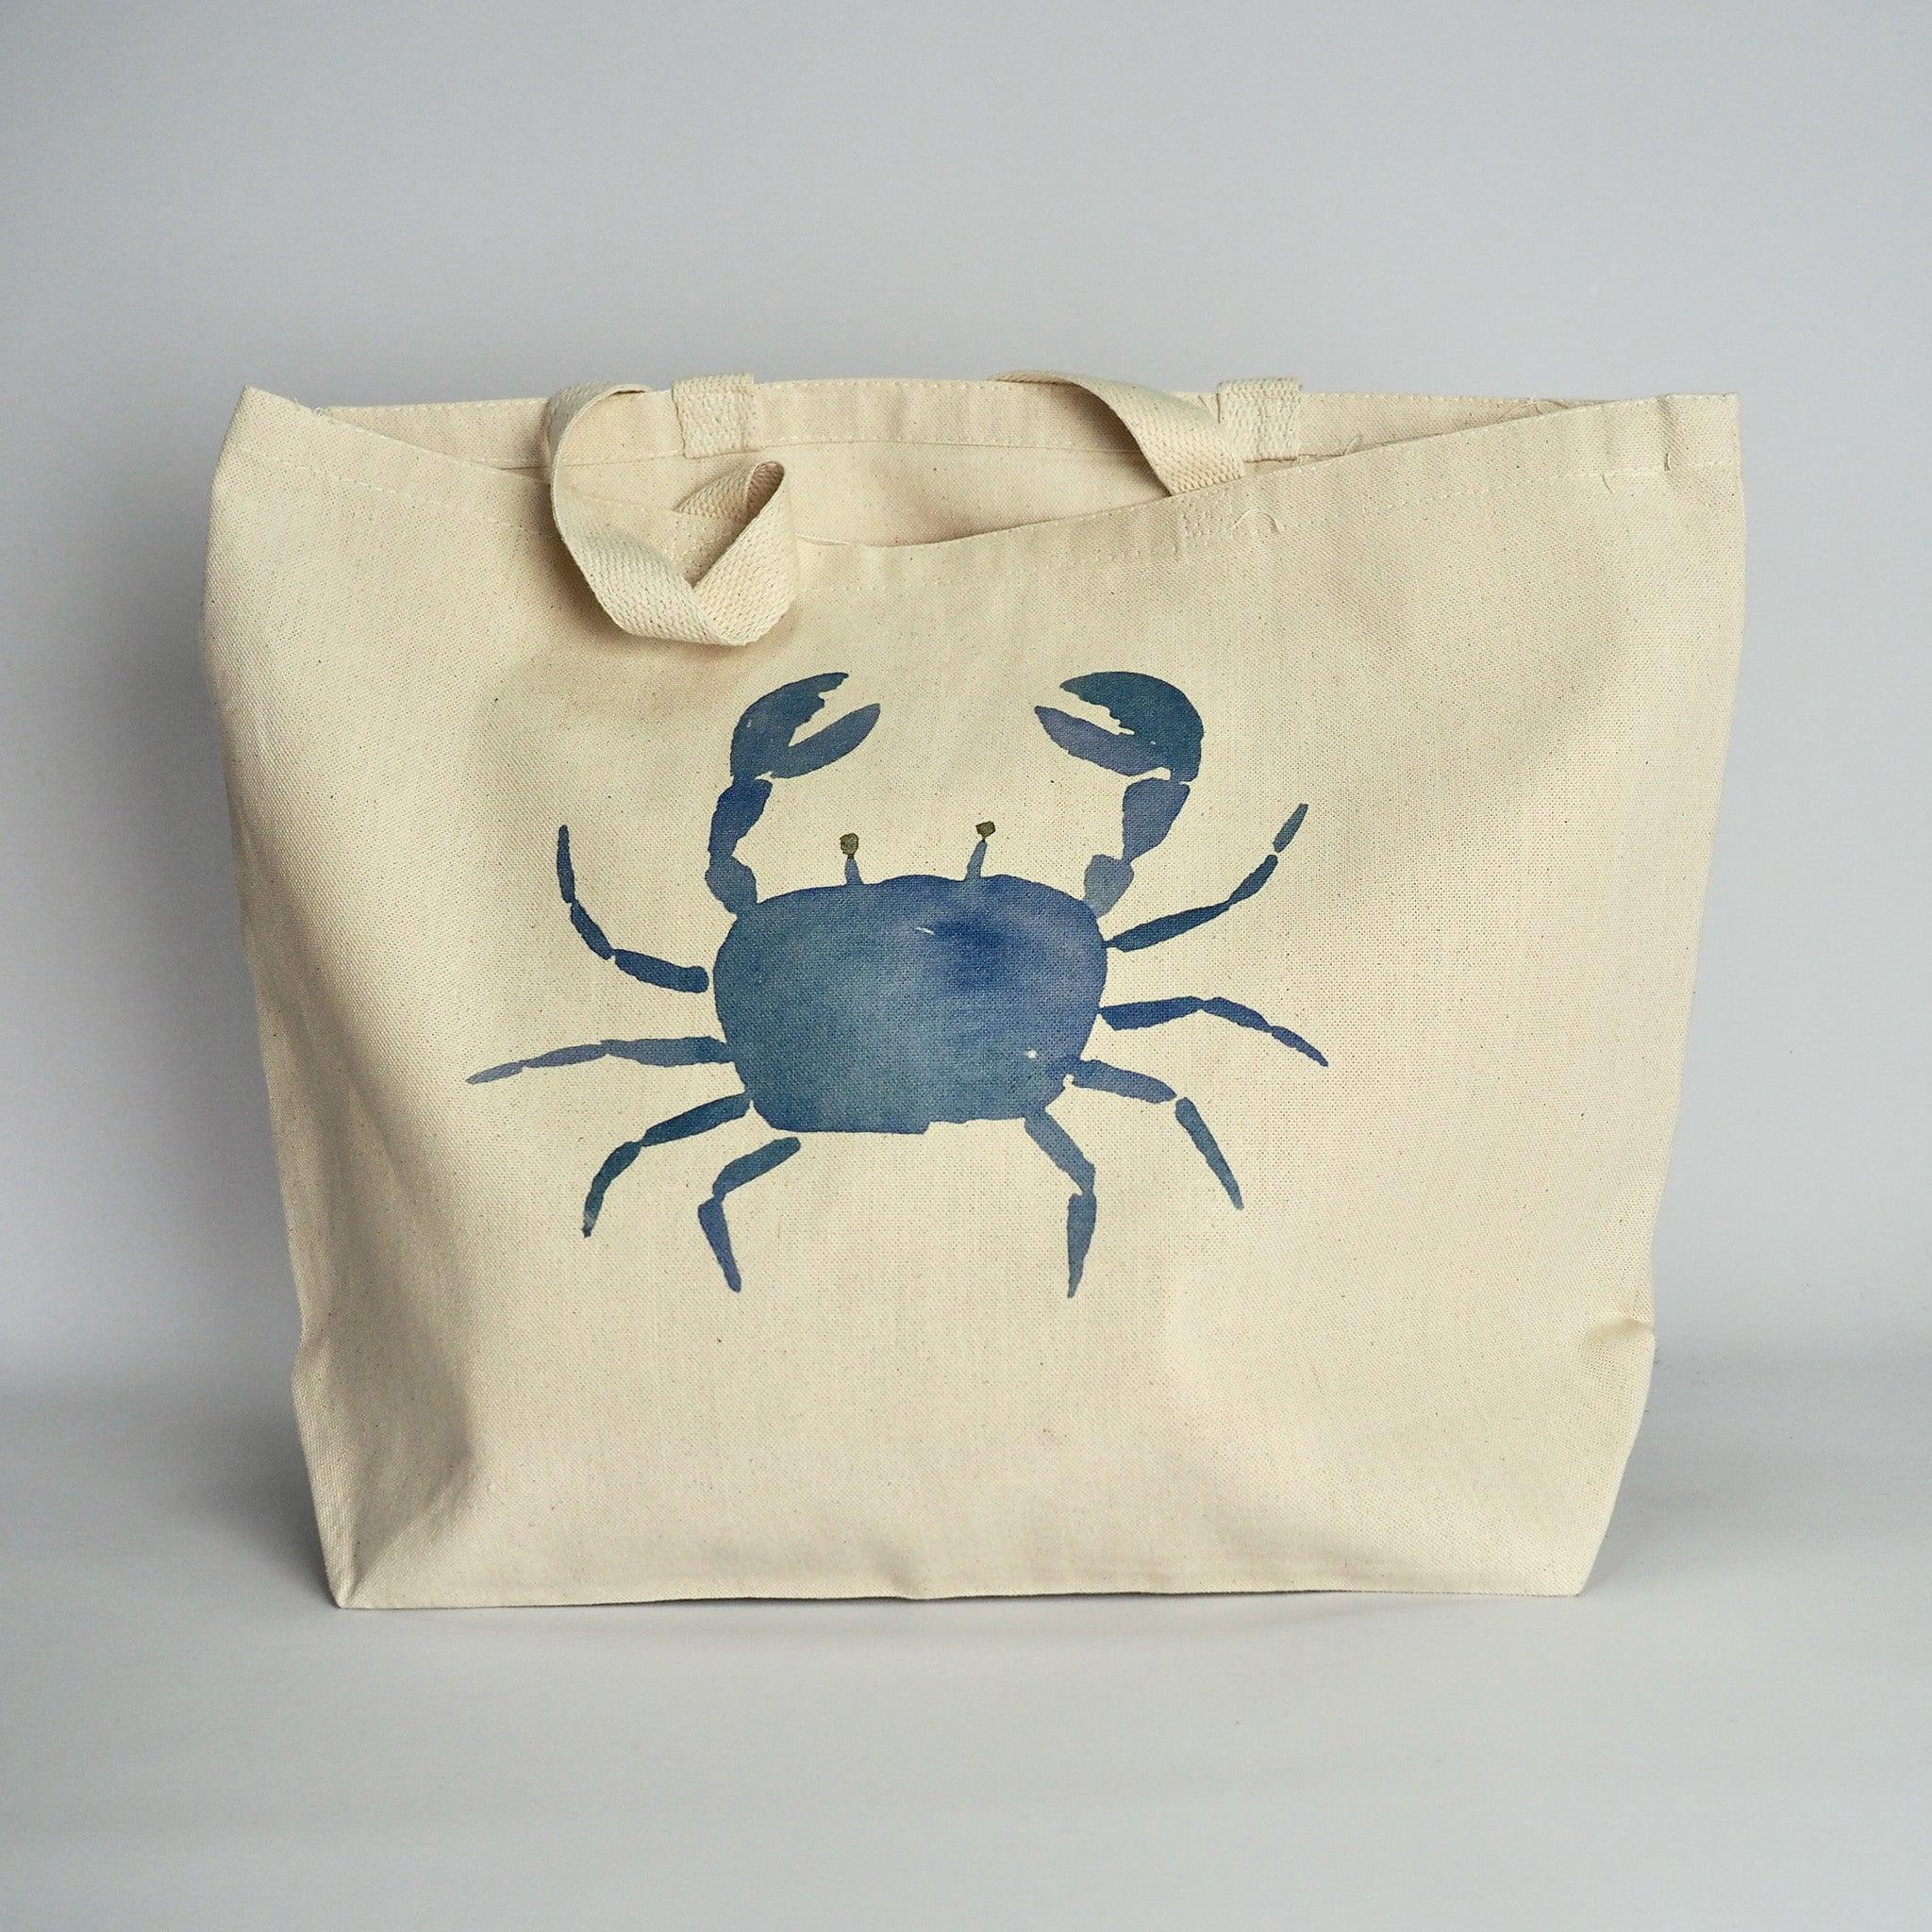 XL Canvas Tote Bag with a fun crab print design on front in blue and with handles folded over.